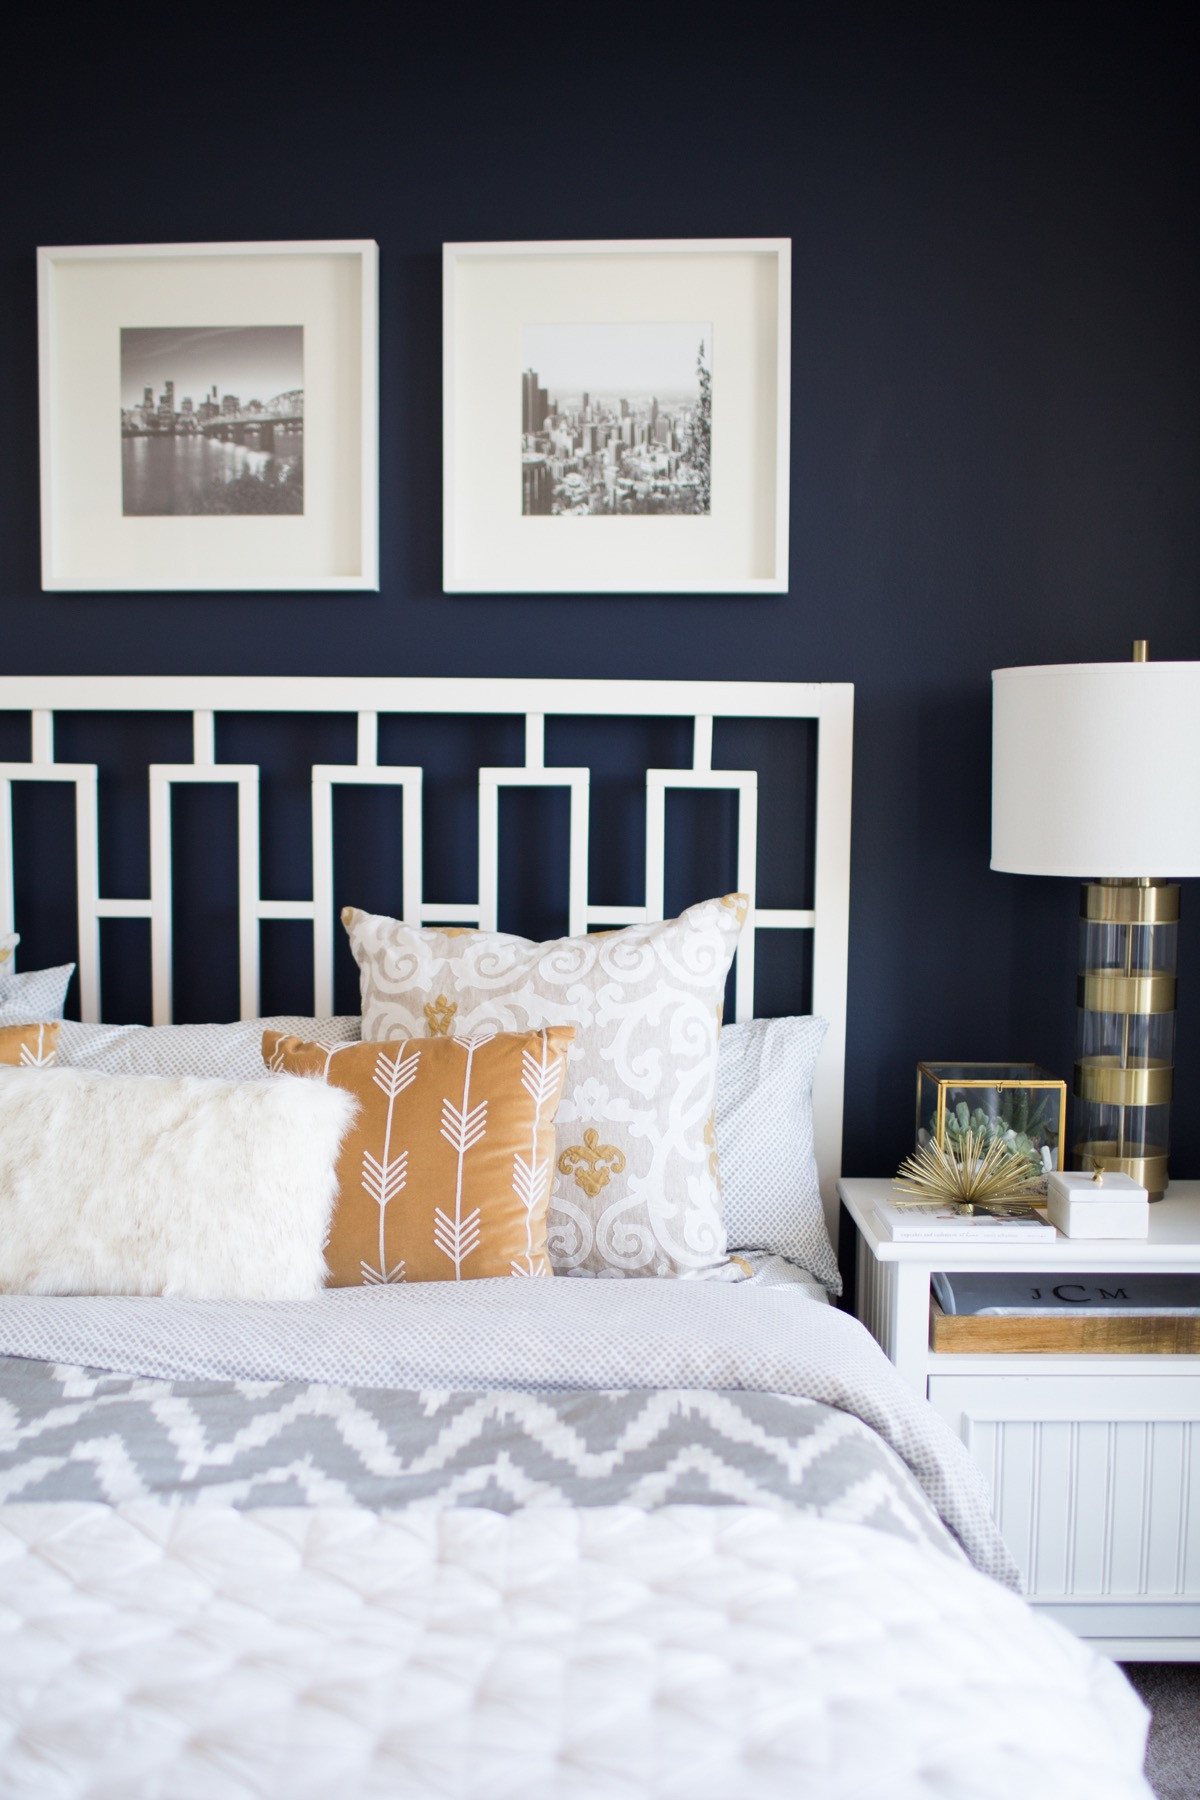 Pictures For Bedroom Walls
 A Look Inside A Blogger s Navy and Mustard Bedroom My